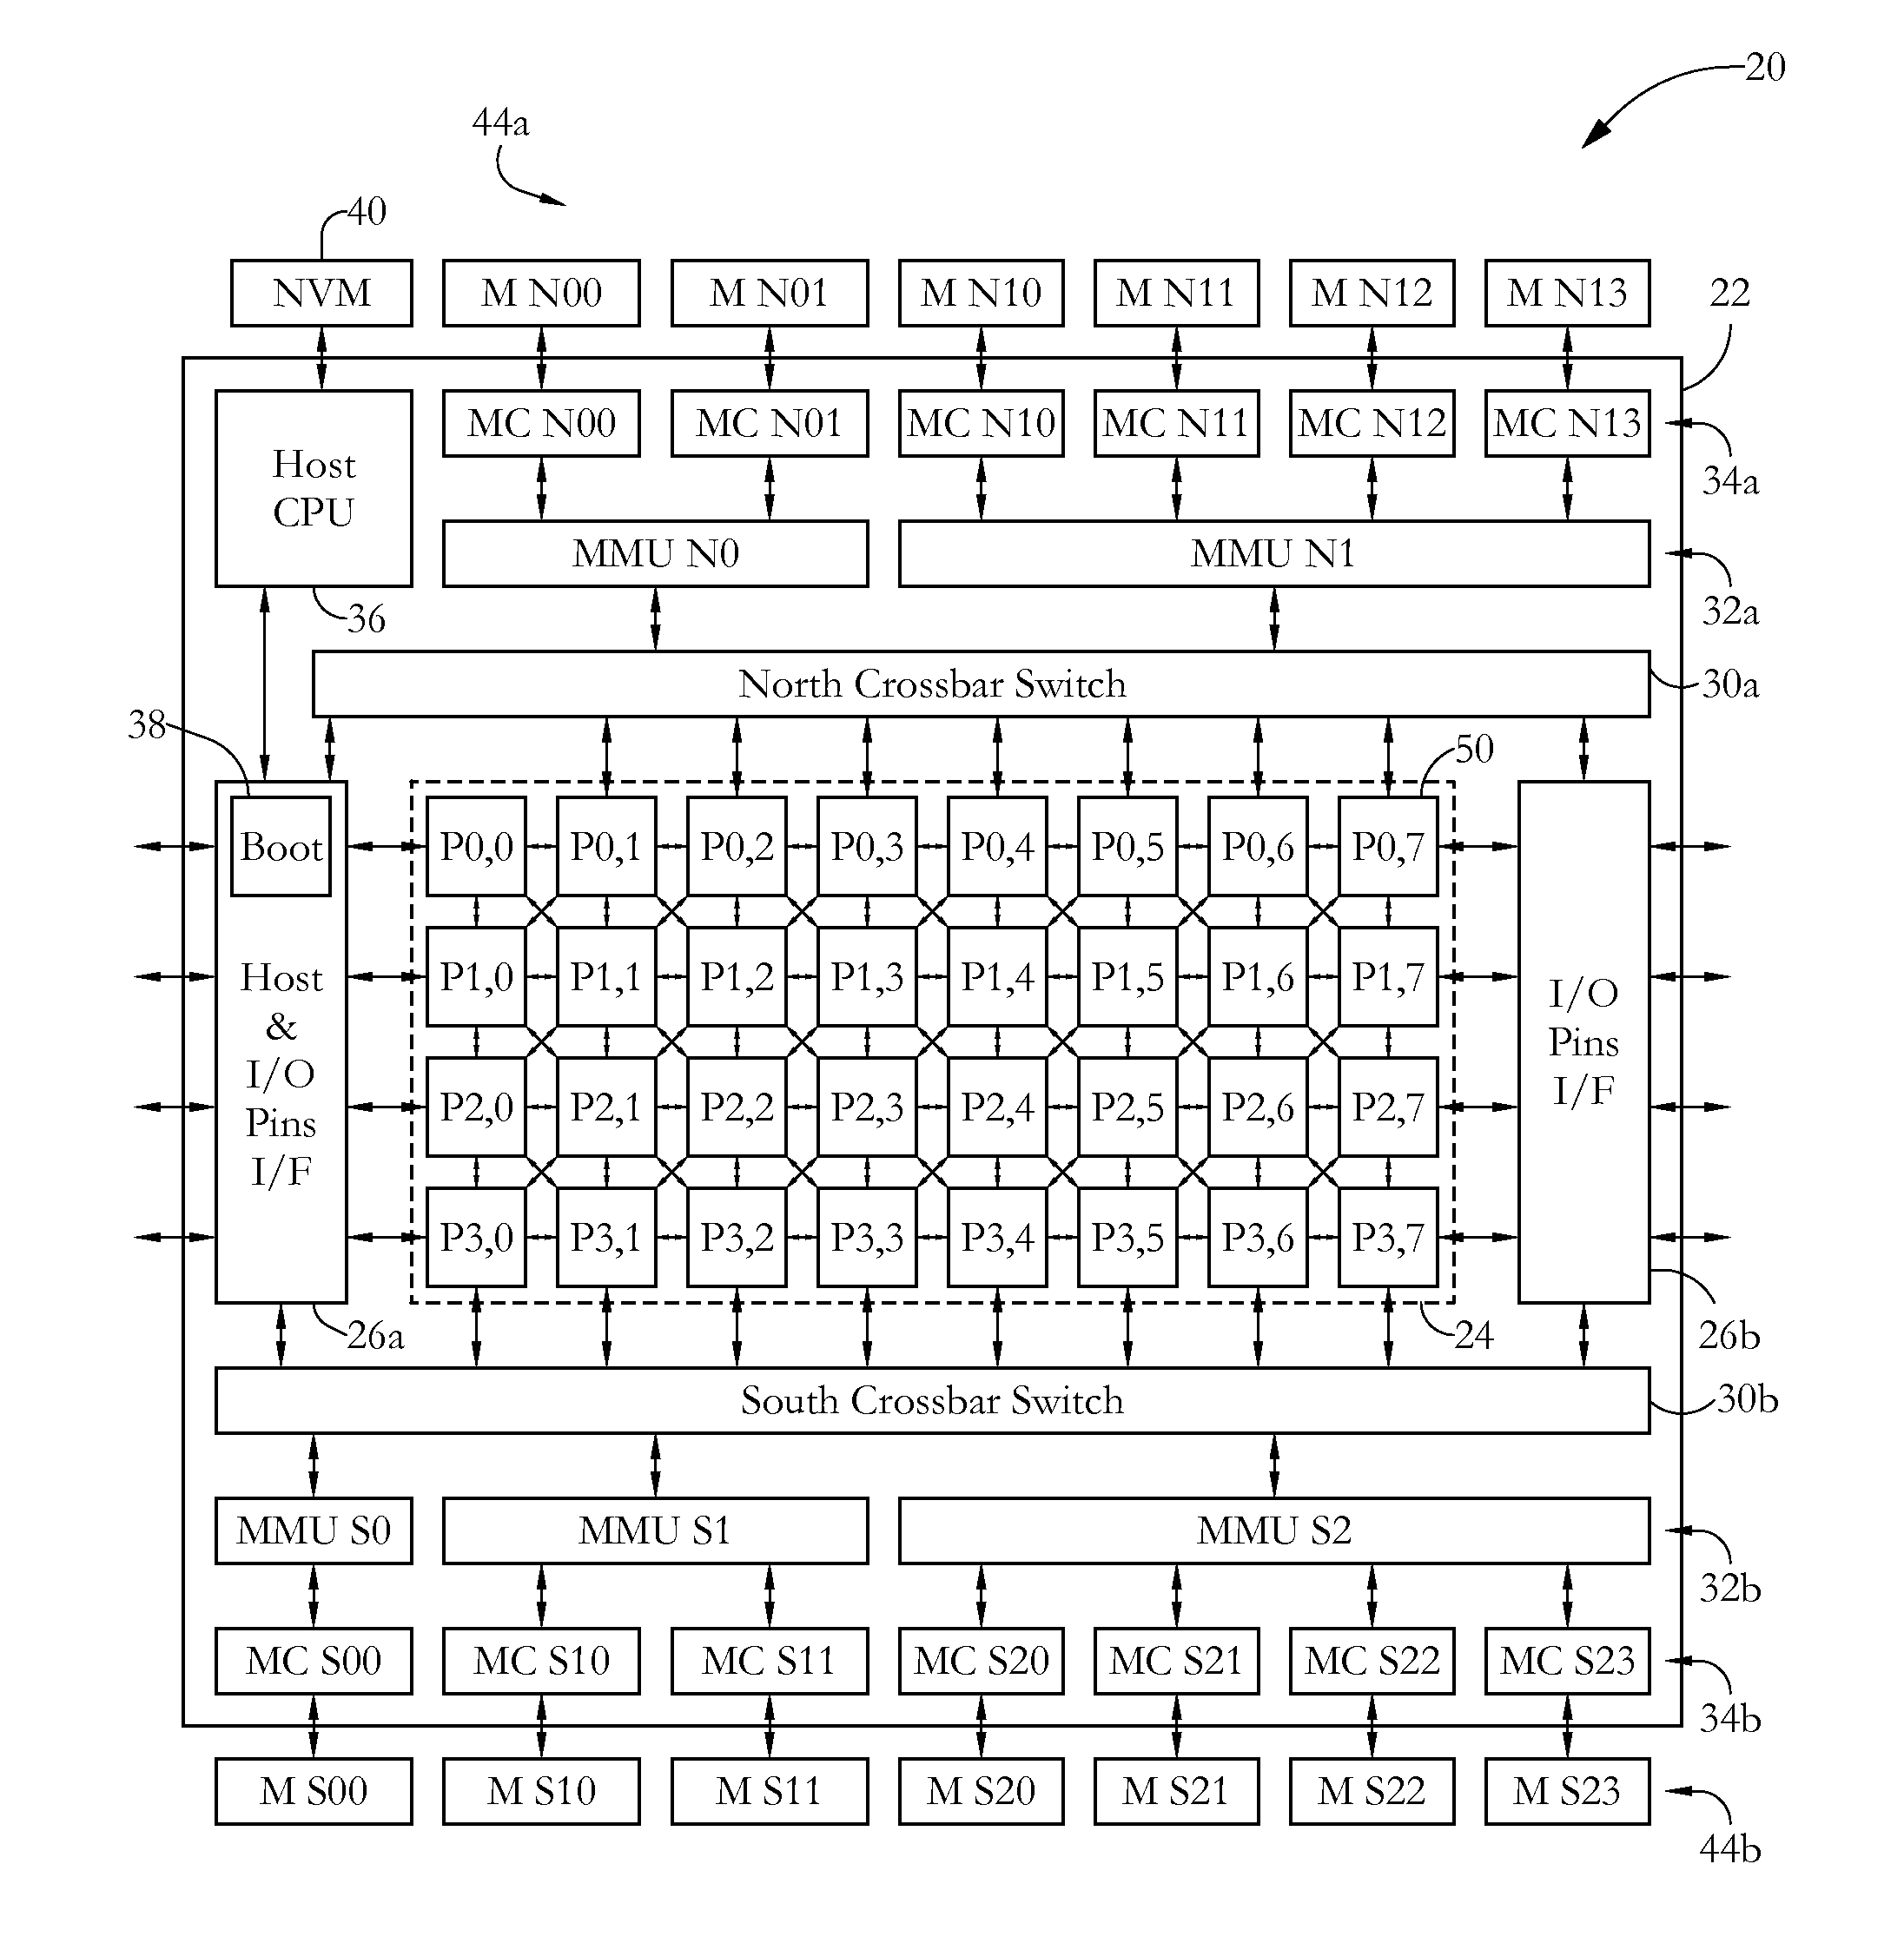 Matrix processor proxy systems and methods